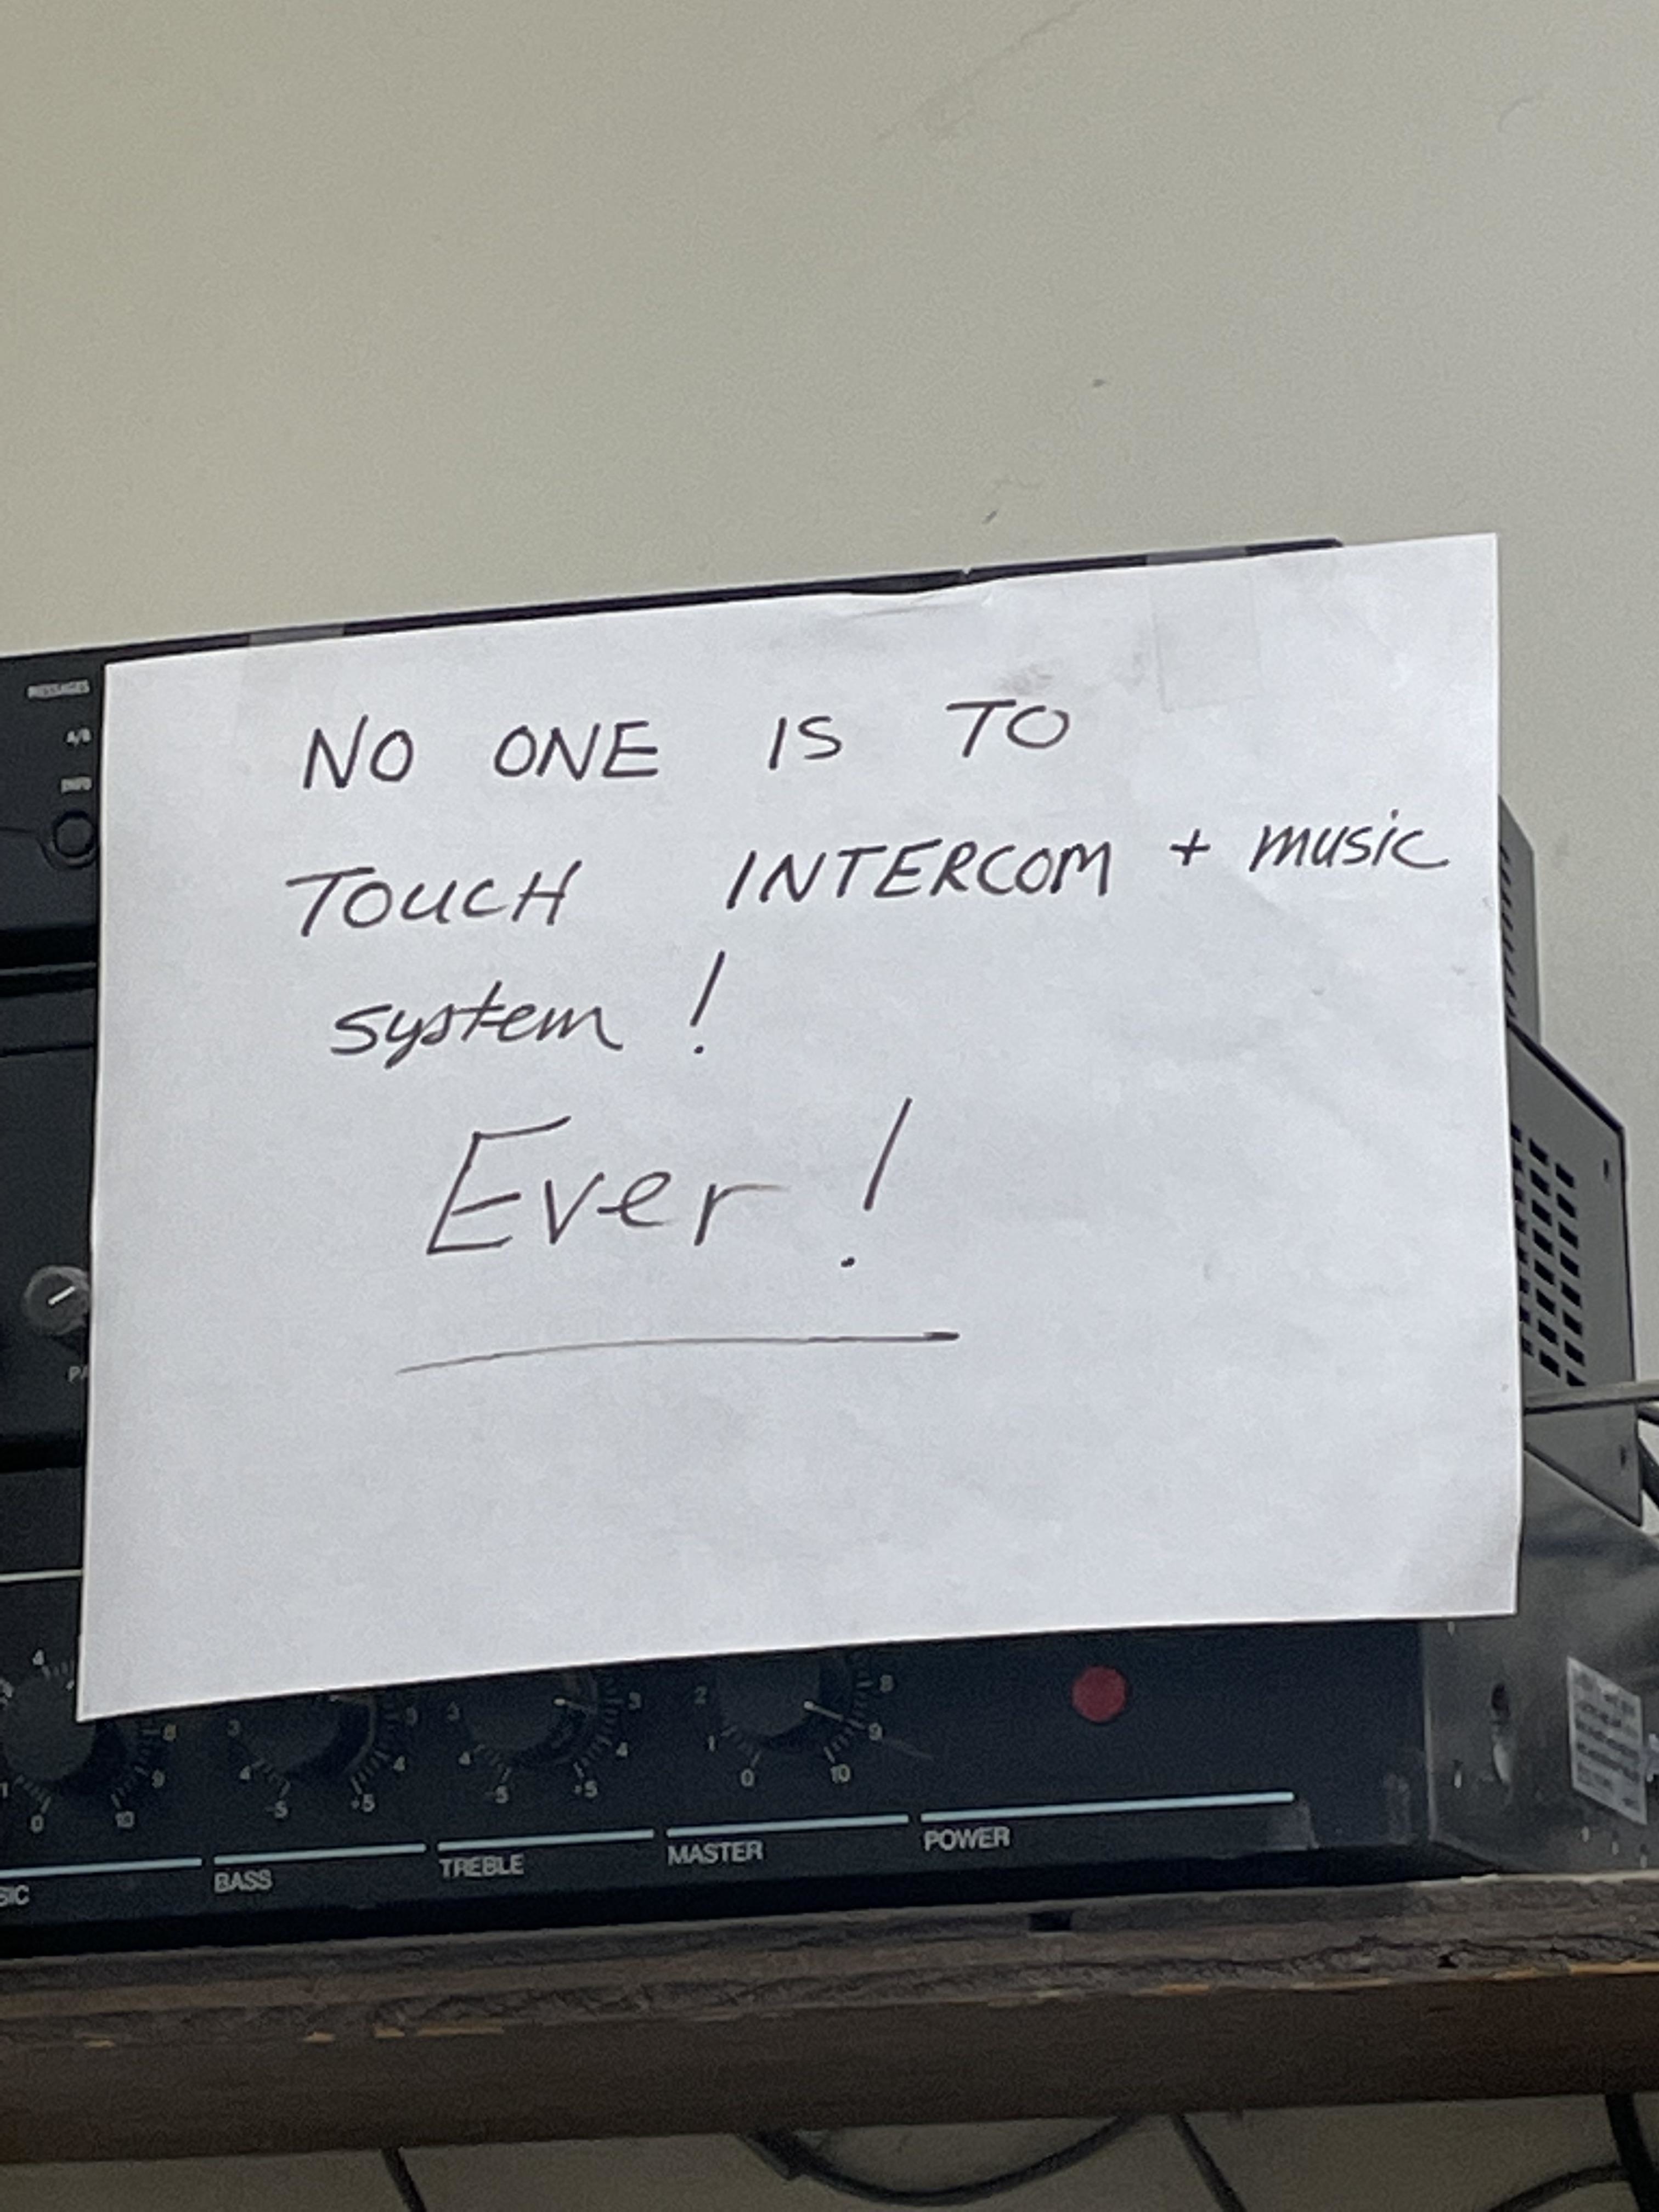 &quot;No one is to touch intercom...&quot;